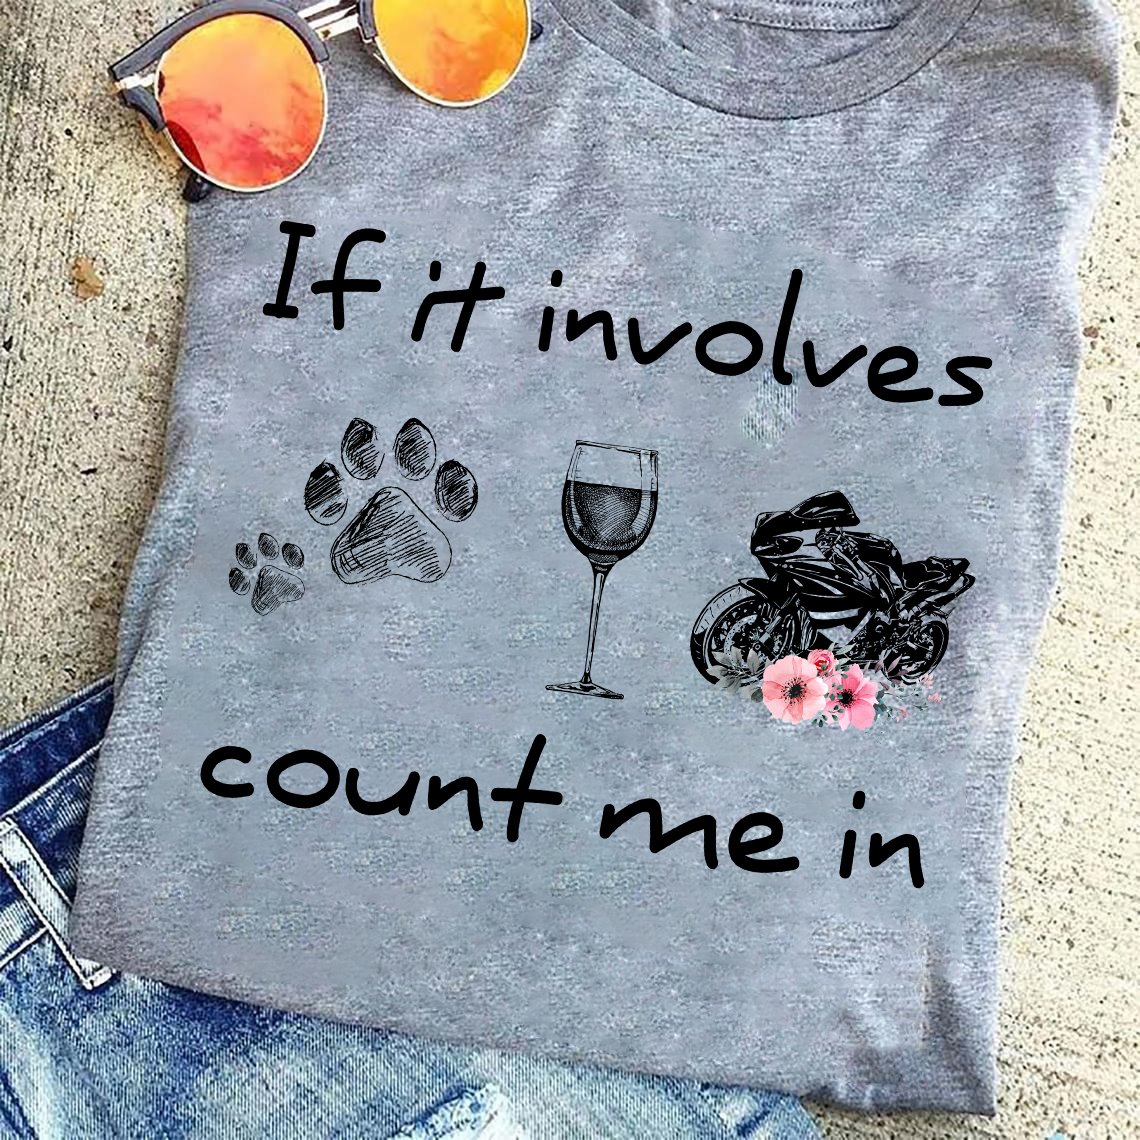 If it involves count me in - Dog footprint, wine and motorcycle